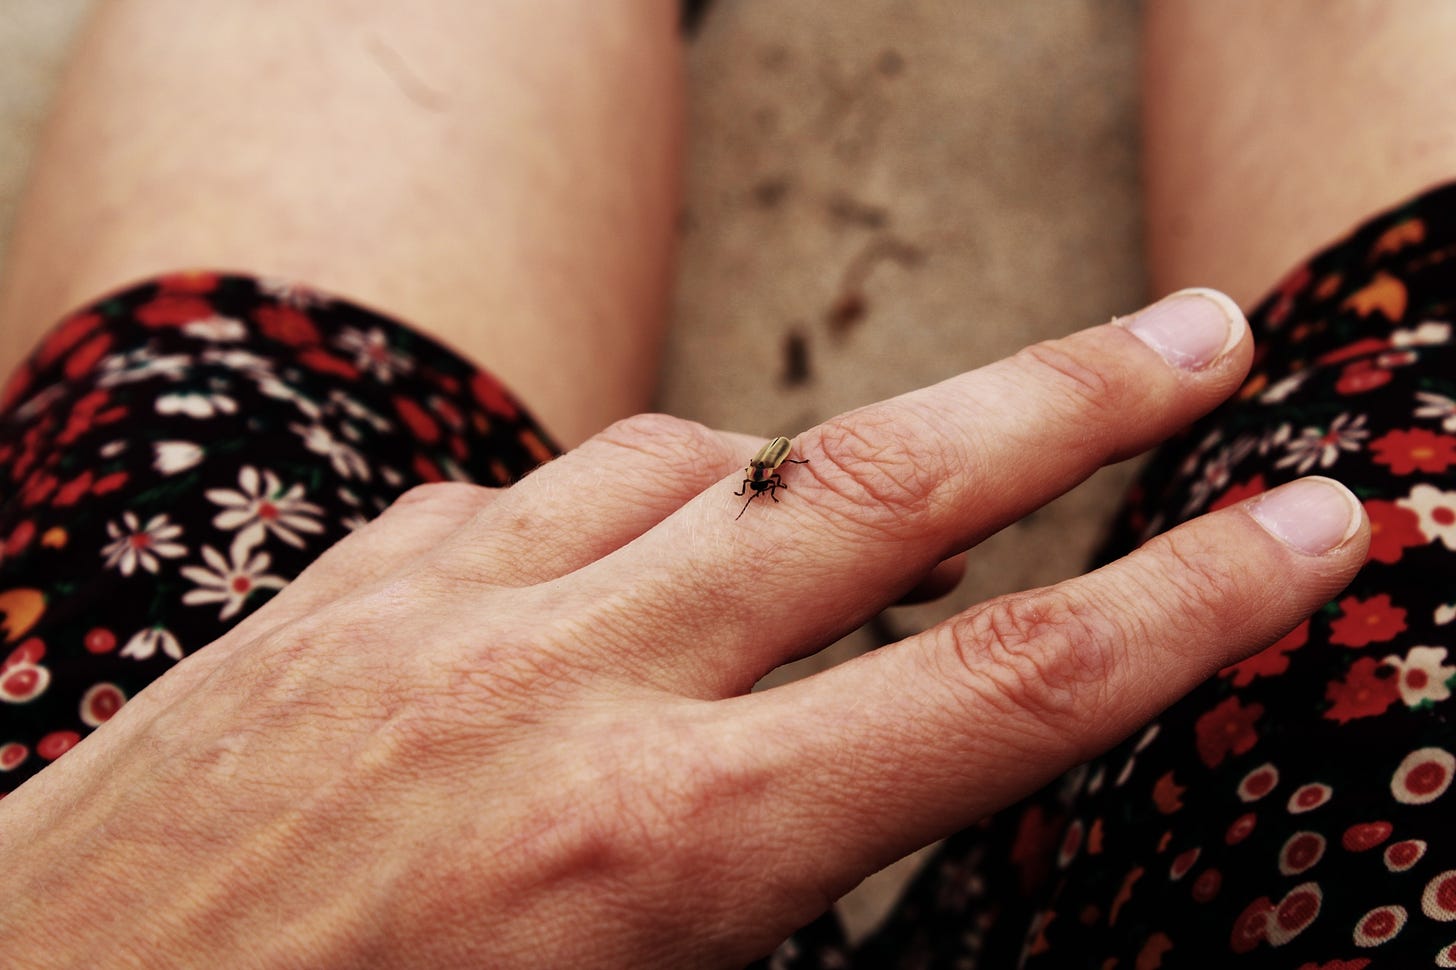 A lightning bug rests on a hand with two stretched straight fingers. In the background you can see the slightly out of focus edges of a floral-patterned dress and the person's legs.